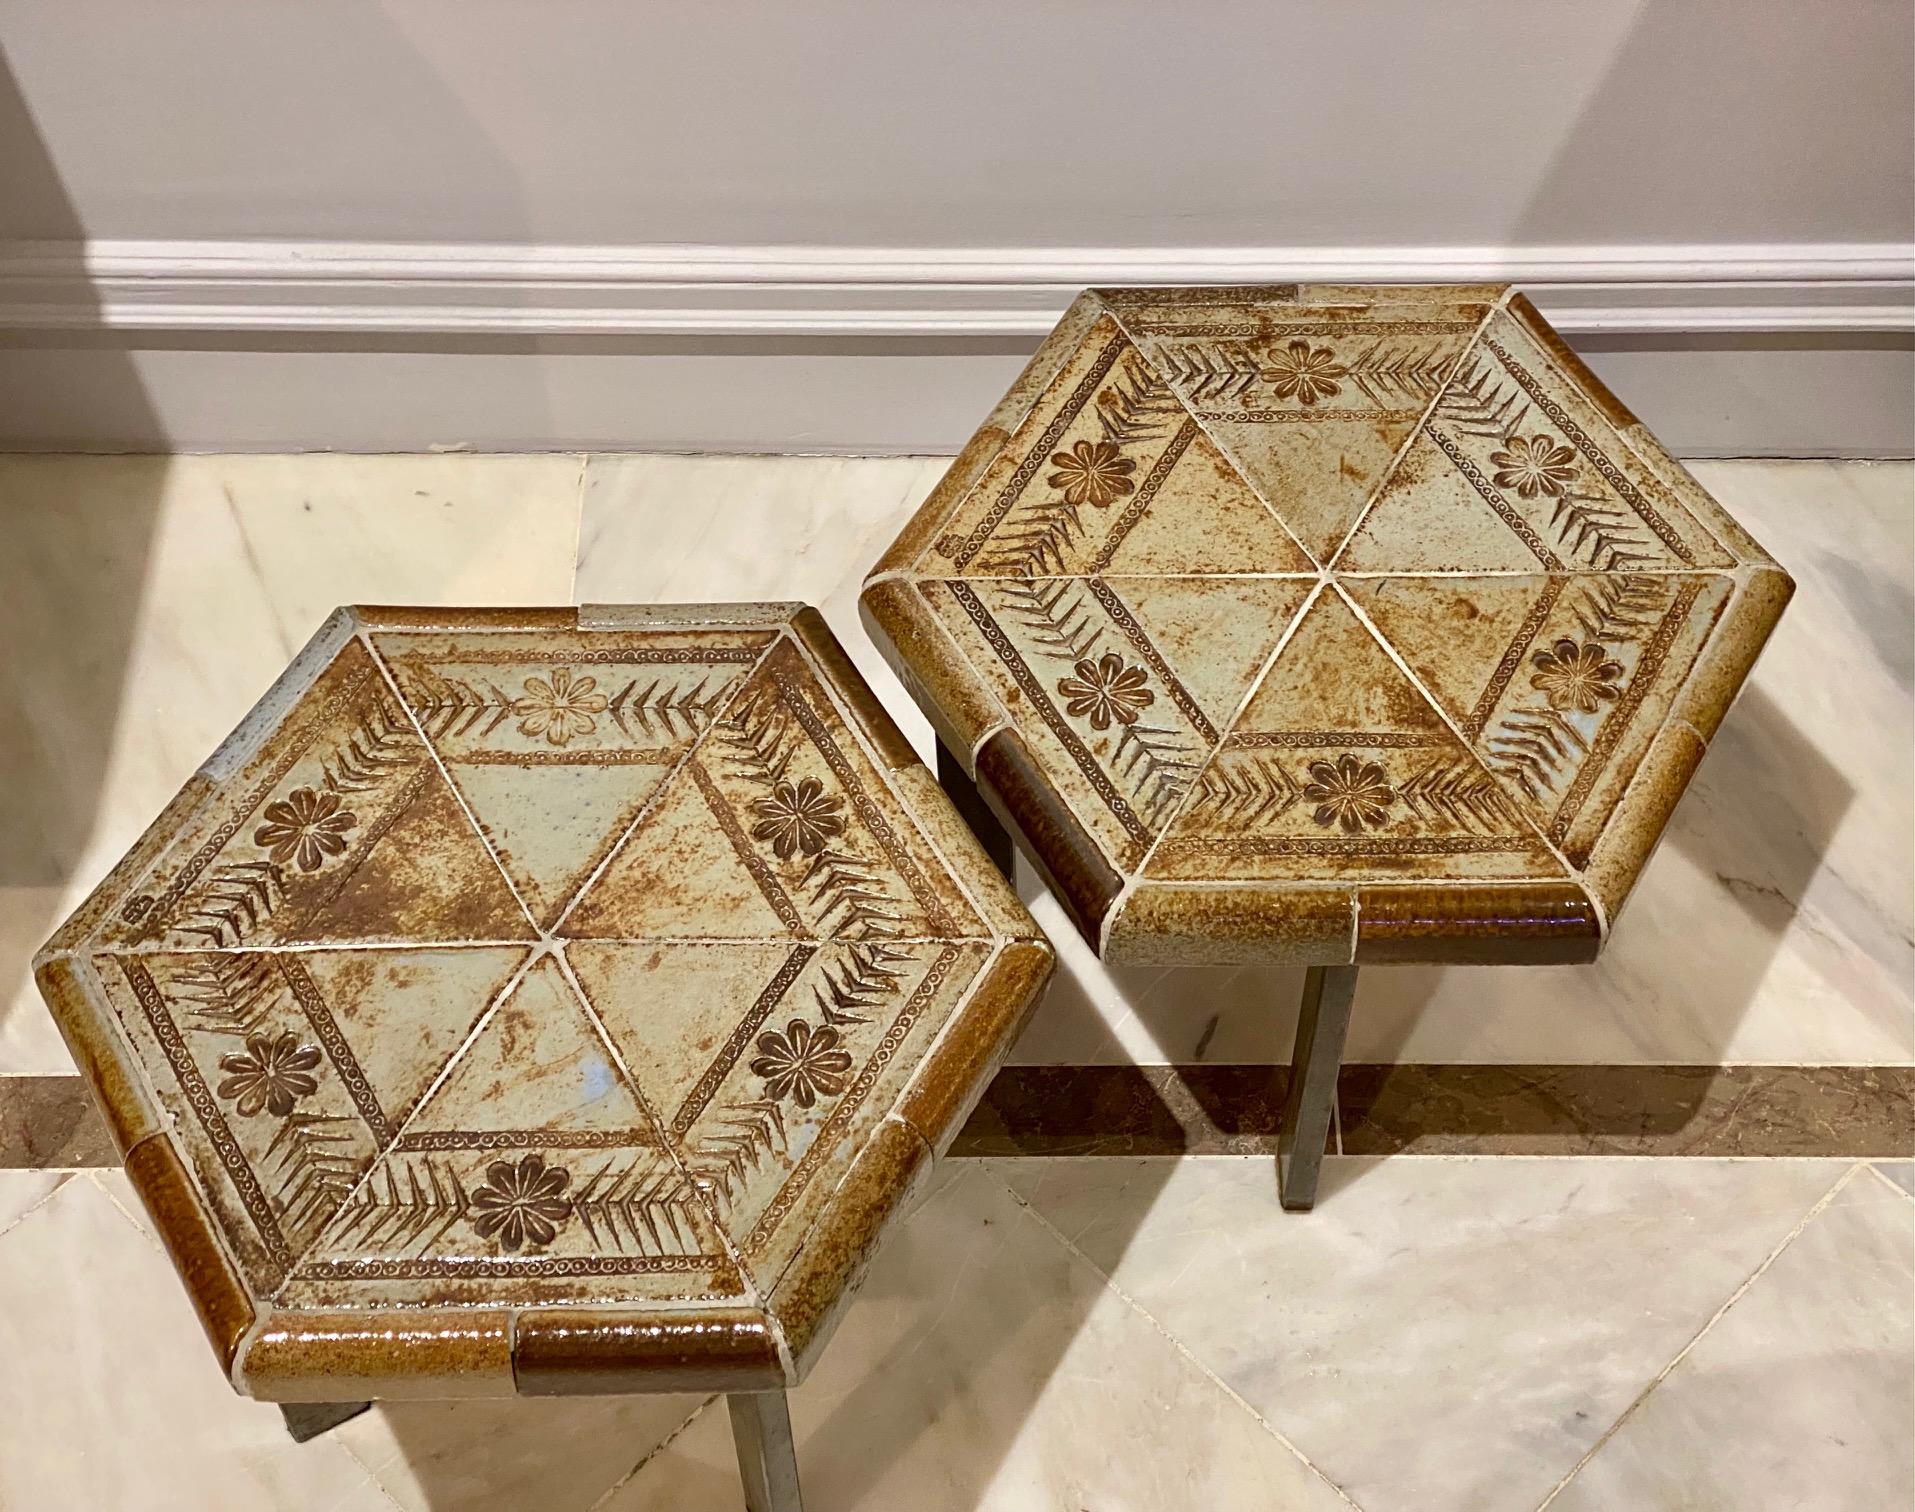 Roger Capron (1922-2006)
Hexagonal tables , Tops in Ceramic tiles, decorated with small leaves
Original metal base 

Manufactured, circa 1960 

Measure: H 30 cm x D 40 cm.